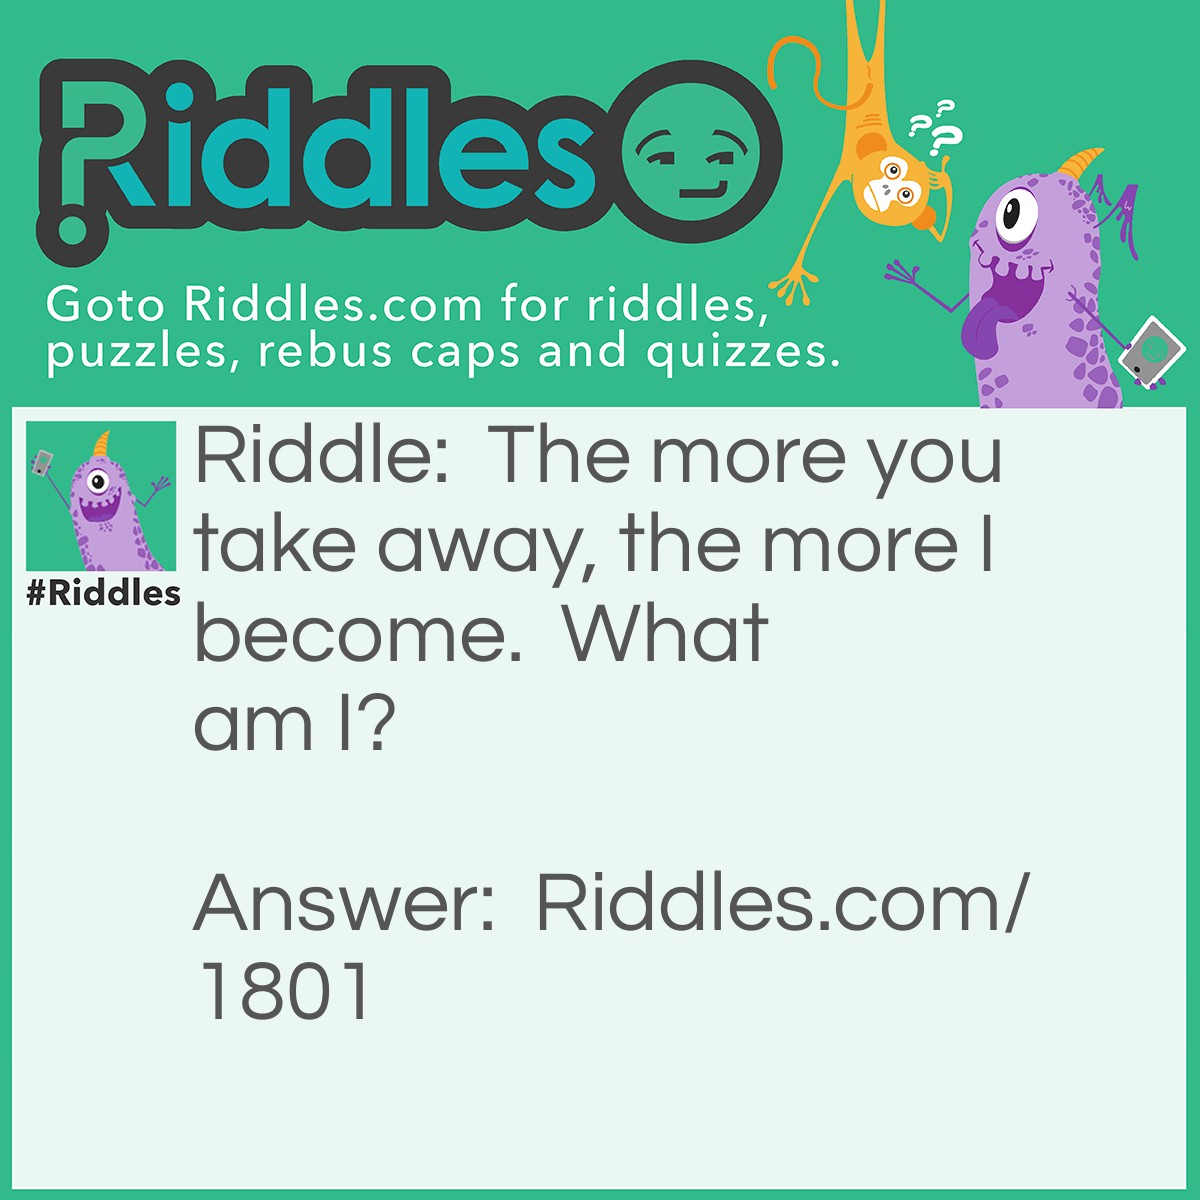 Riddle: The more you take away, the more I become. What am I? Answer: A hole.